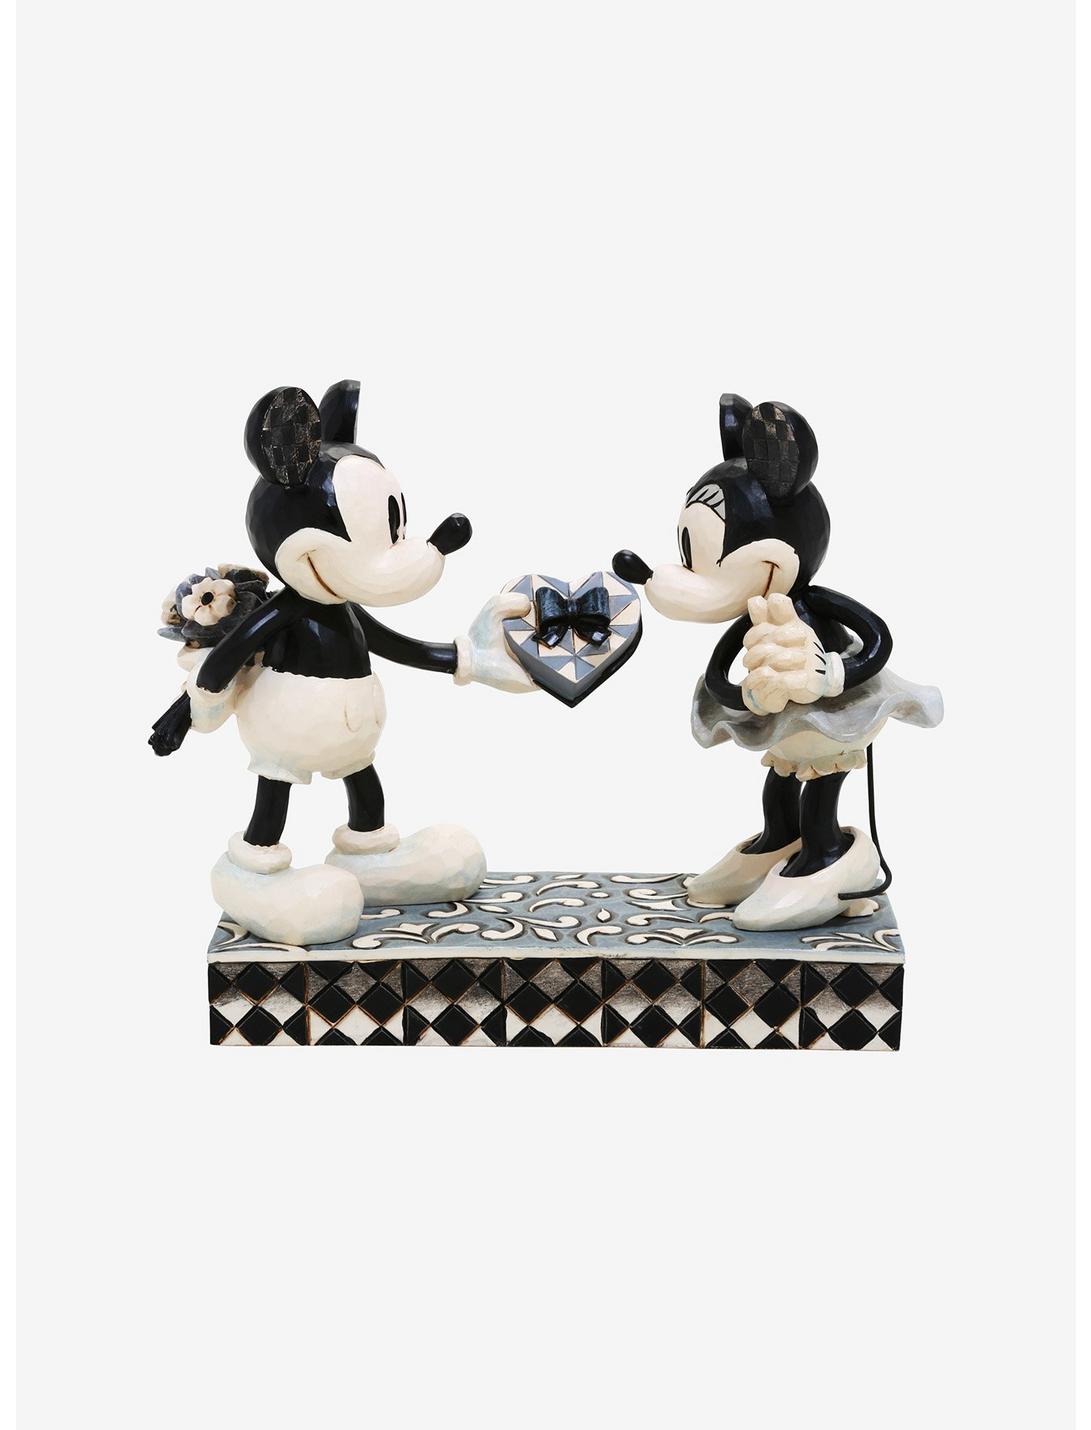 Disney Mickey Mouse & Minnie Mouse Jim Shore Real Sweetheart Figurine